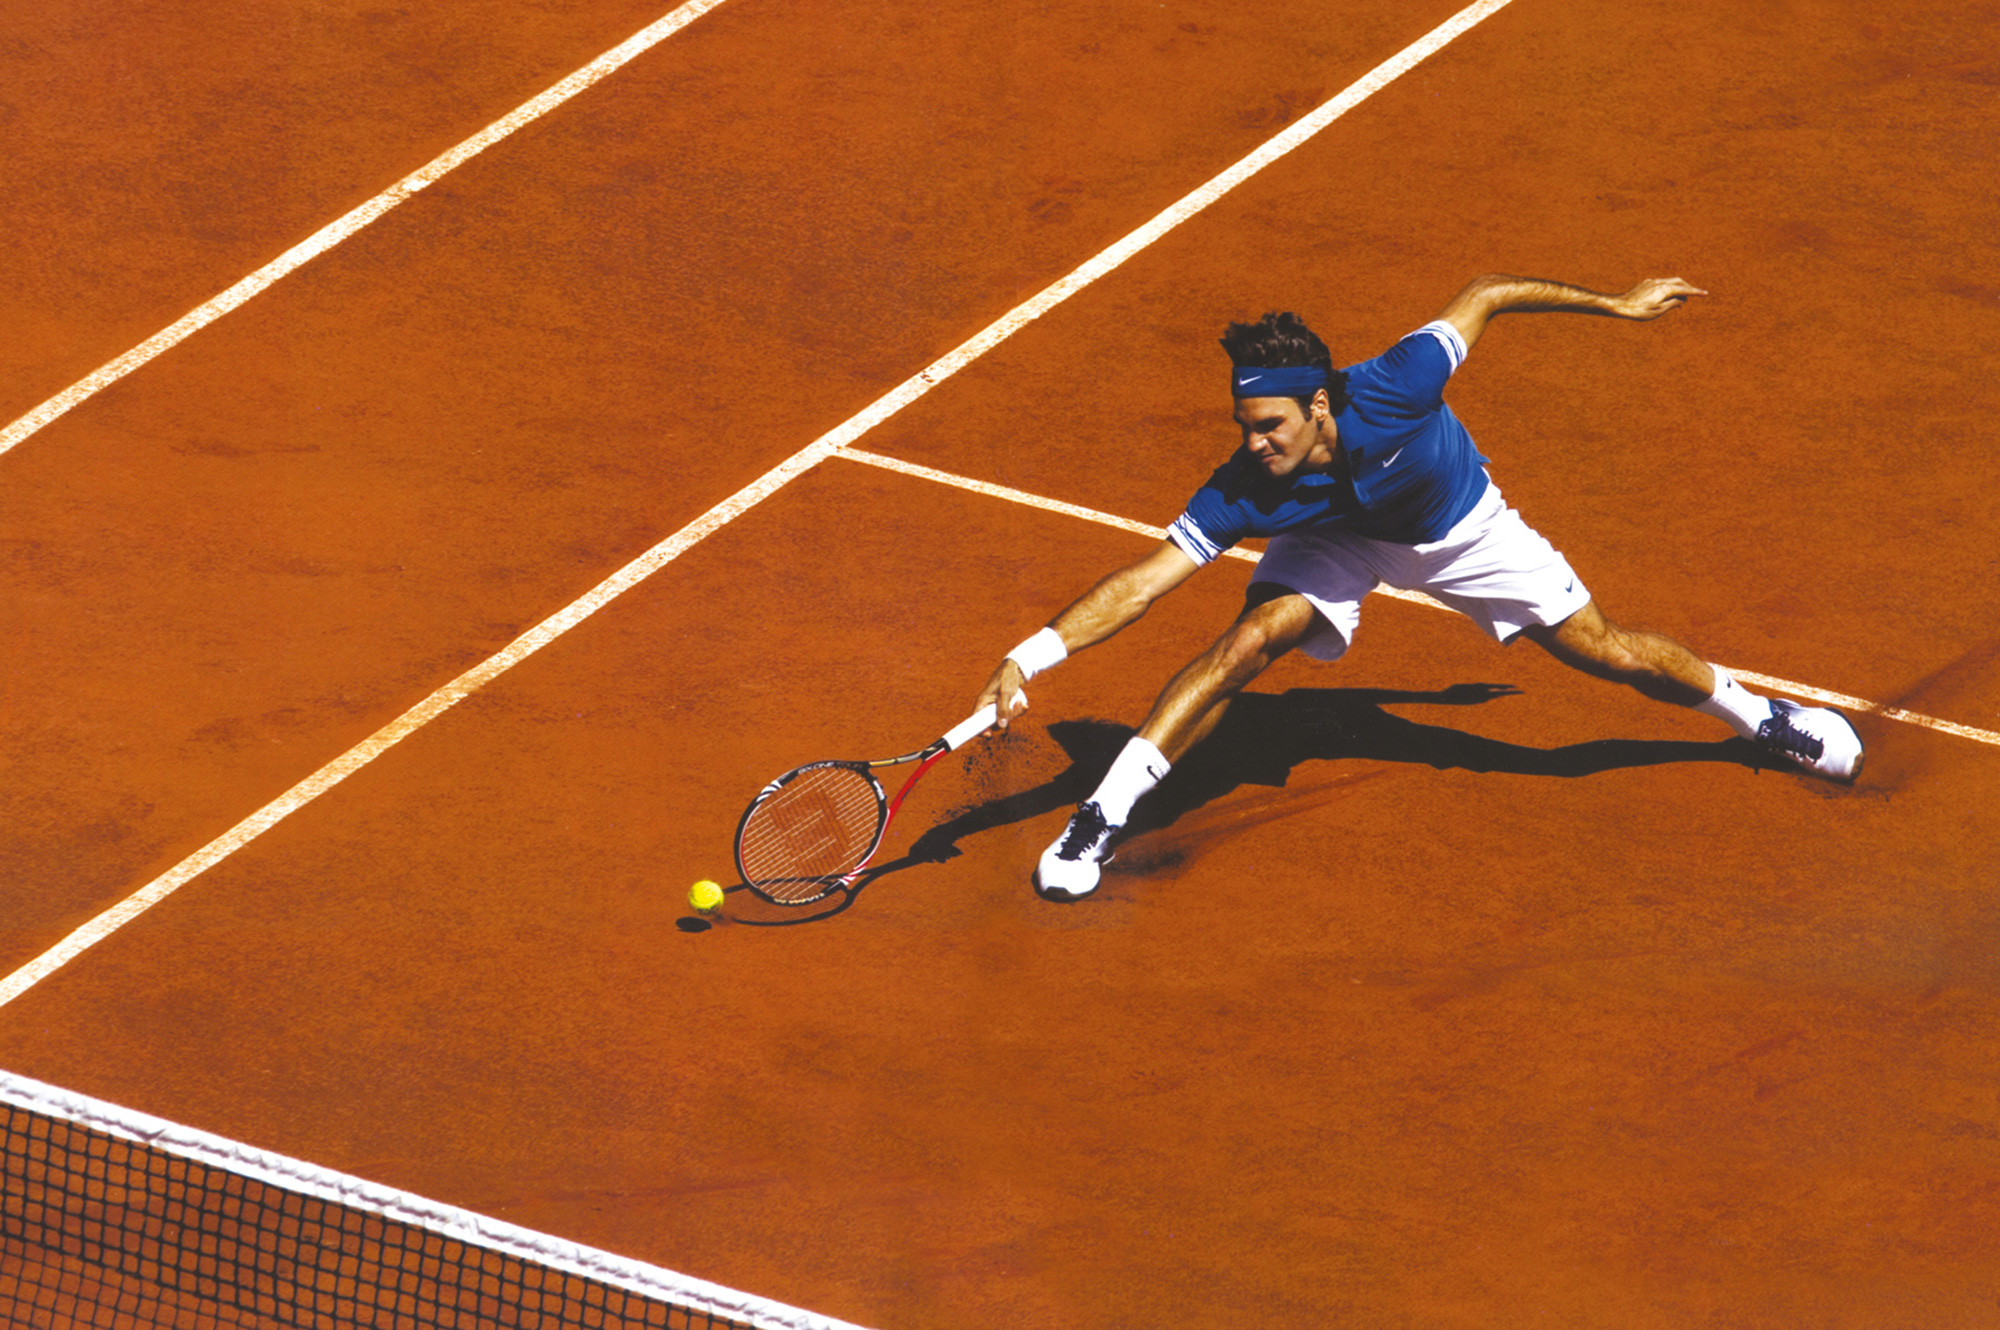 A photograph of Federer diving for the ball at the two thousand and ten French Open.